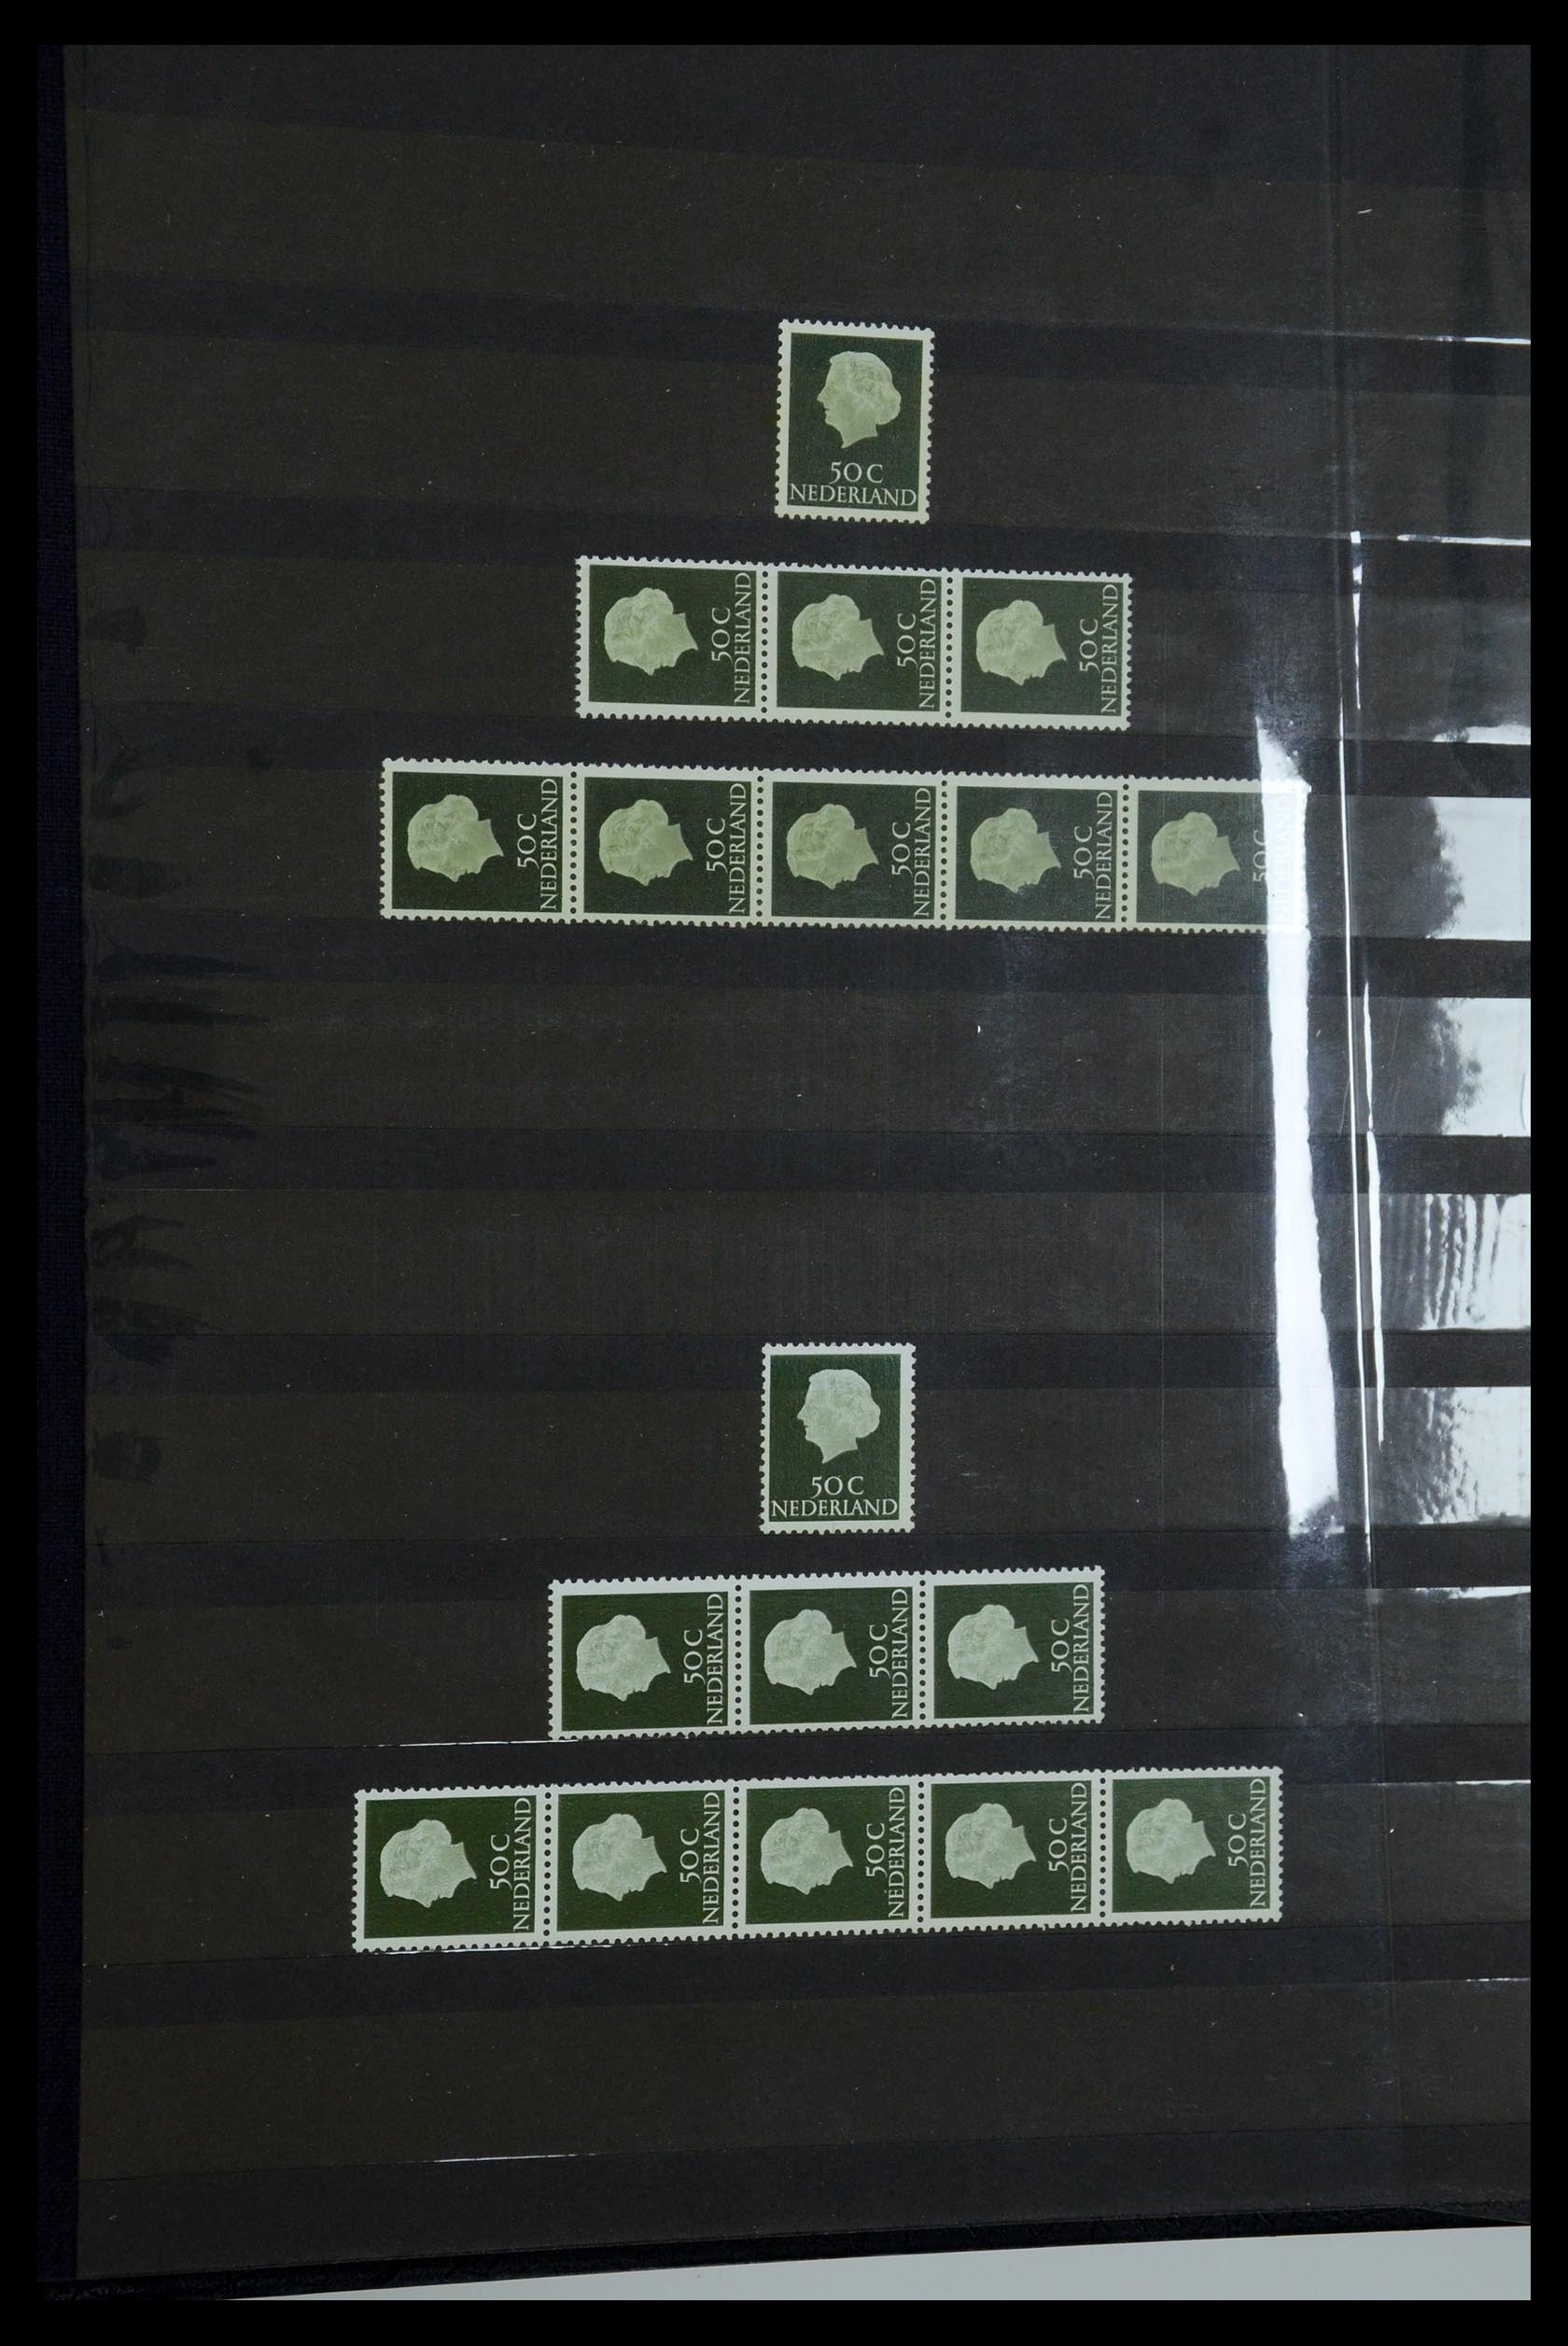 35543 033 - Stamp Collection 35543 Netherlands coilstamps 1965-1972.